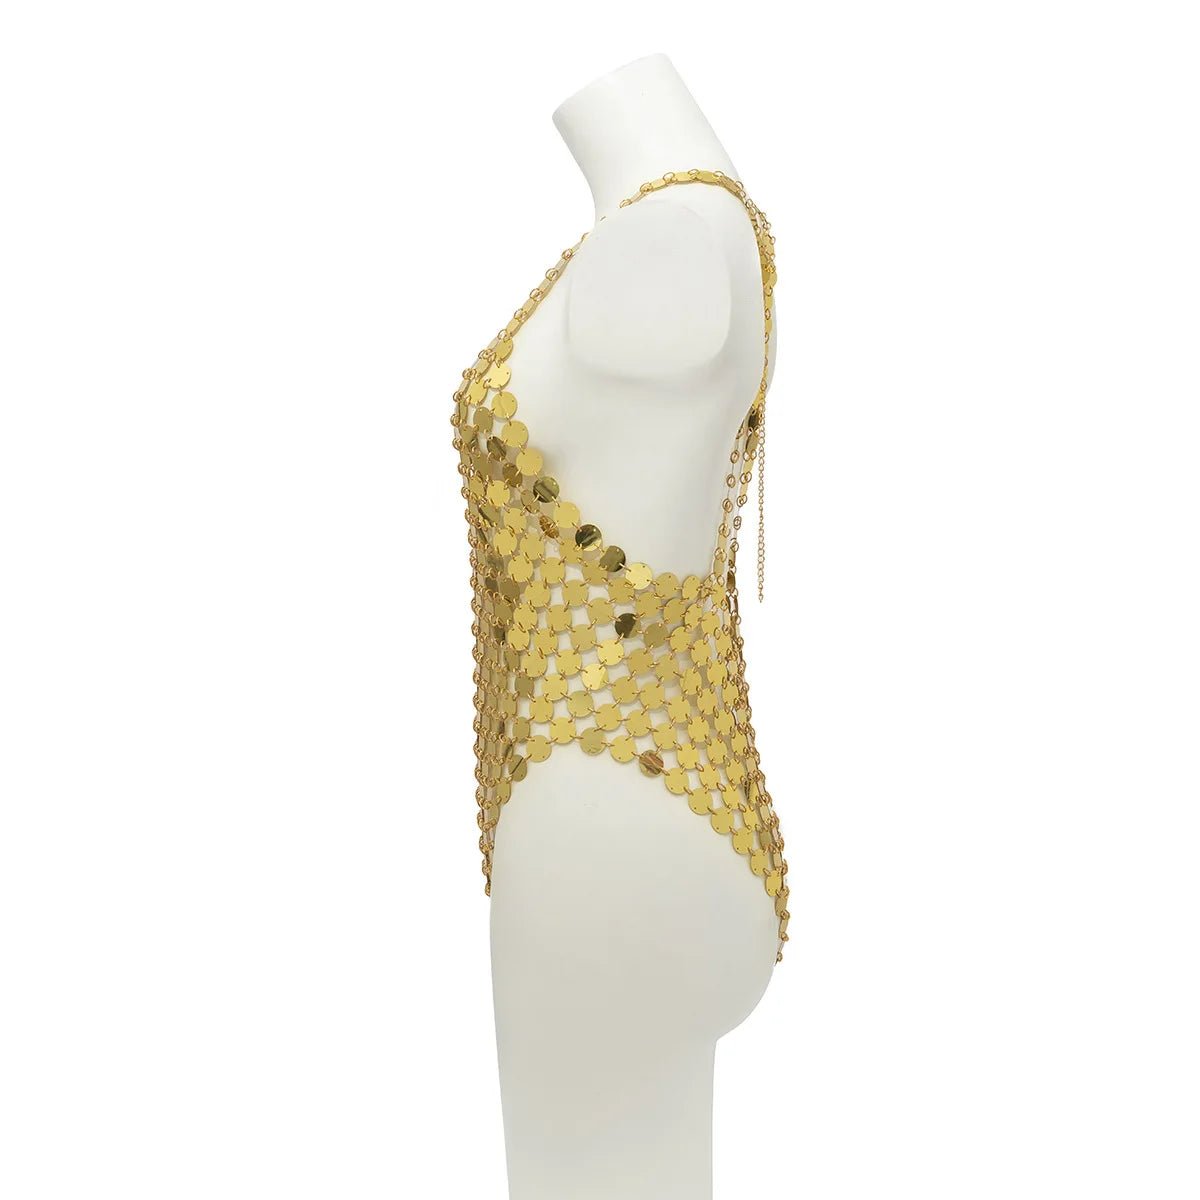 Glitter Sequined Mirror Chain Bodysuit - The Rave Cave